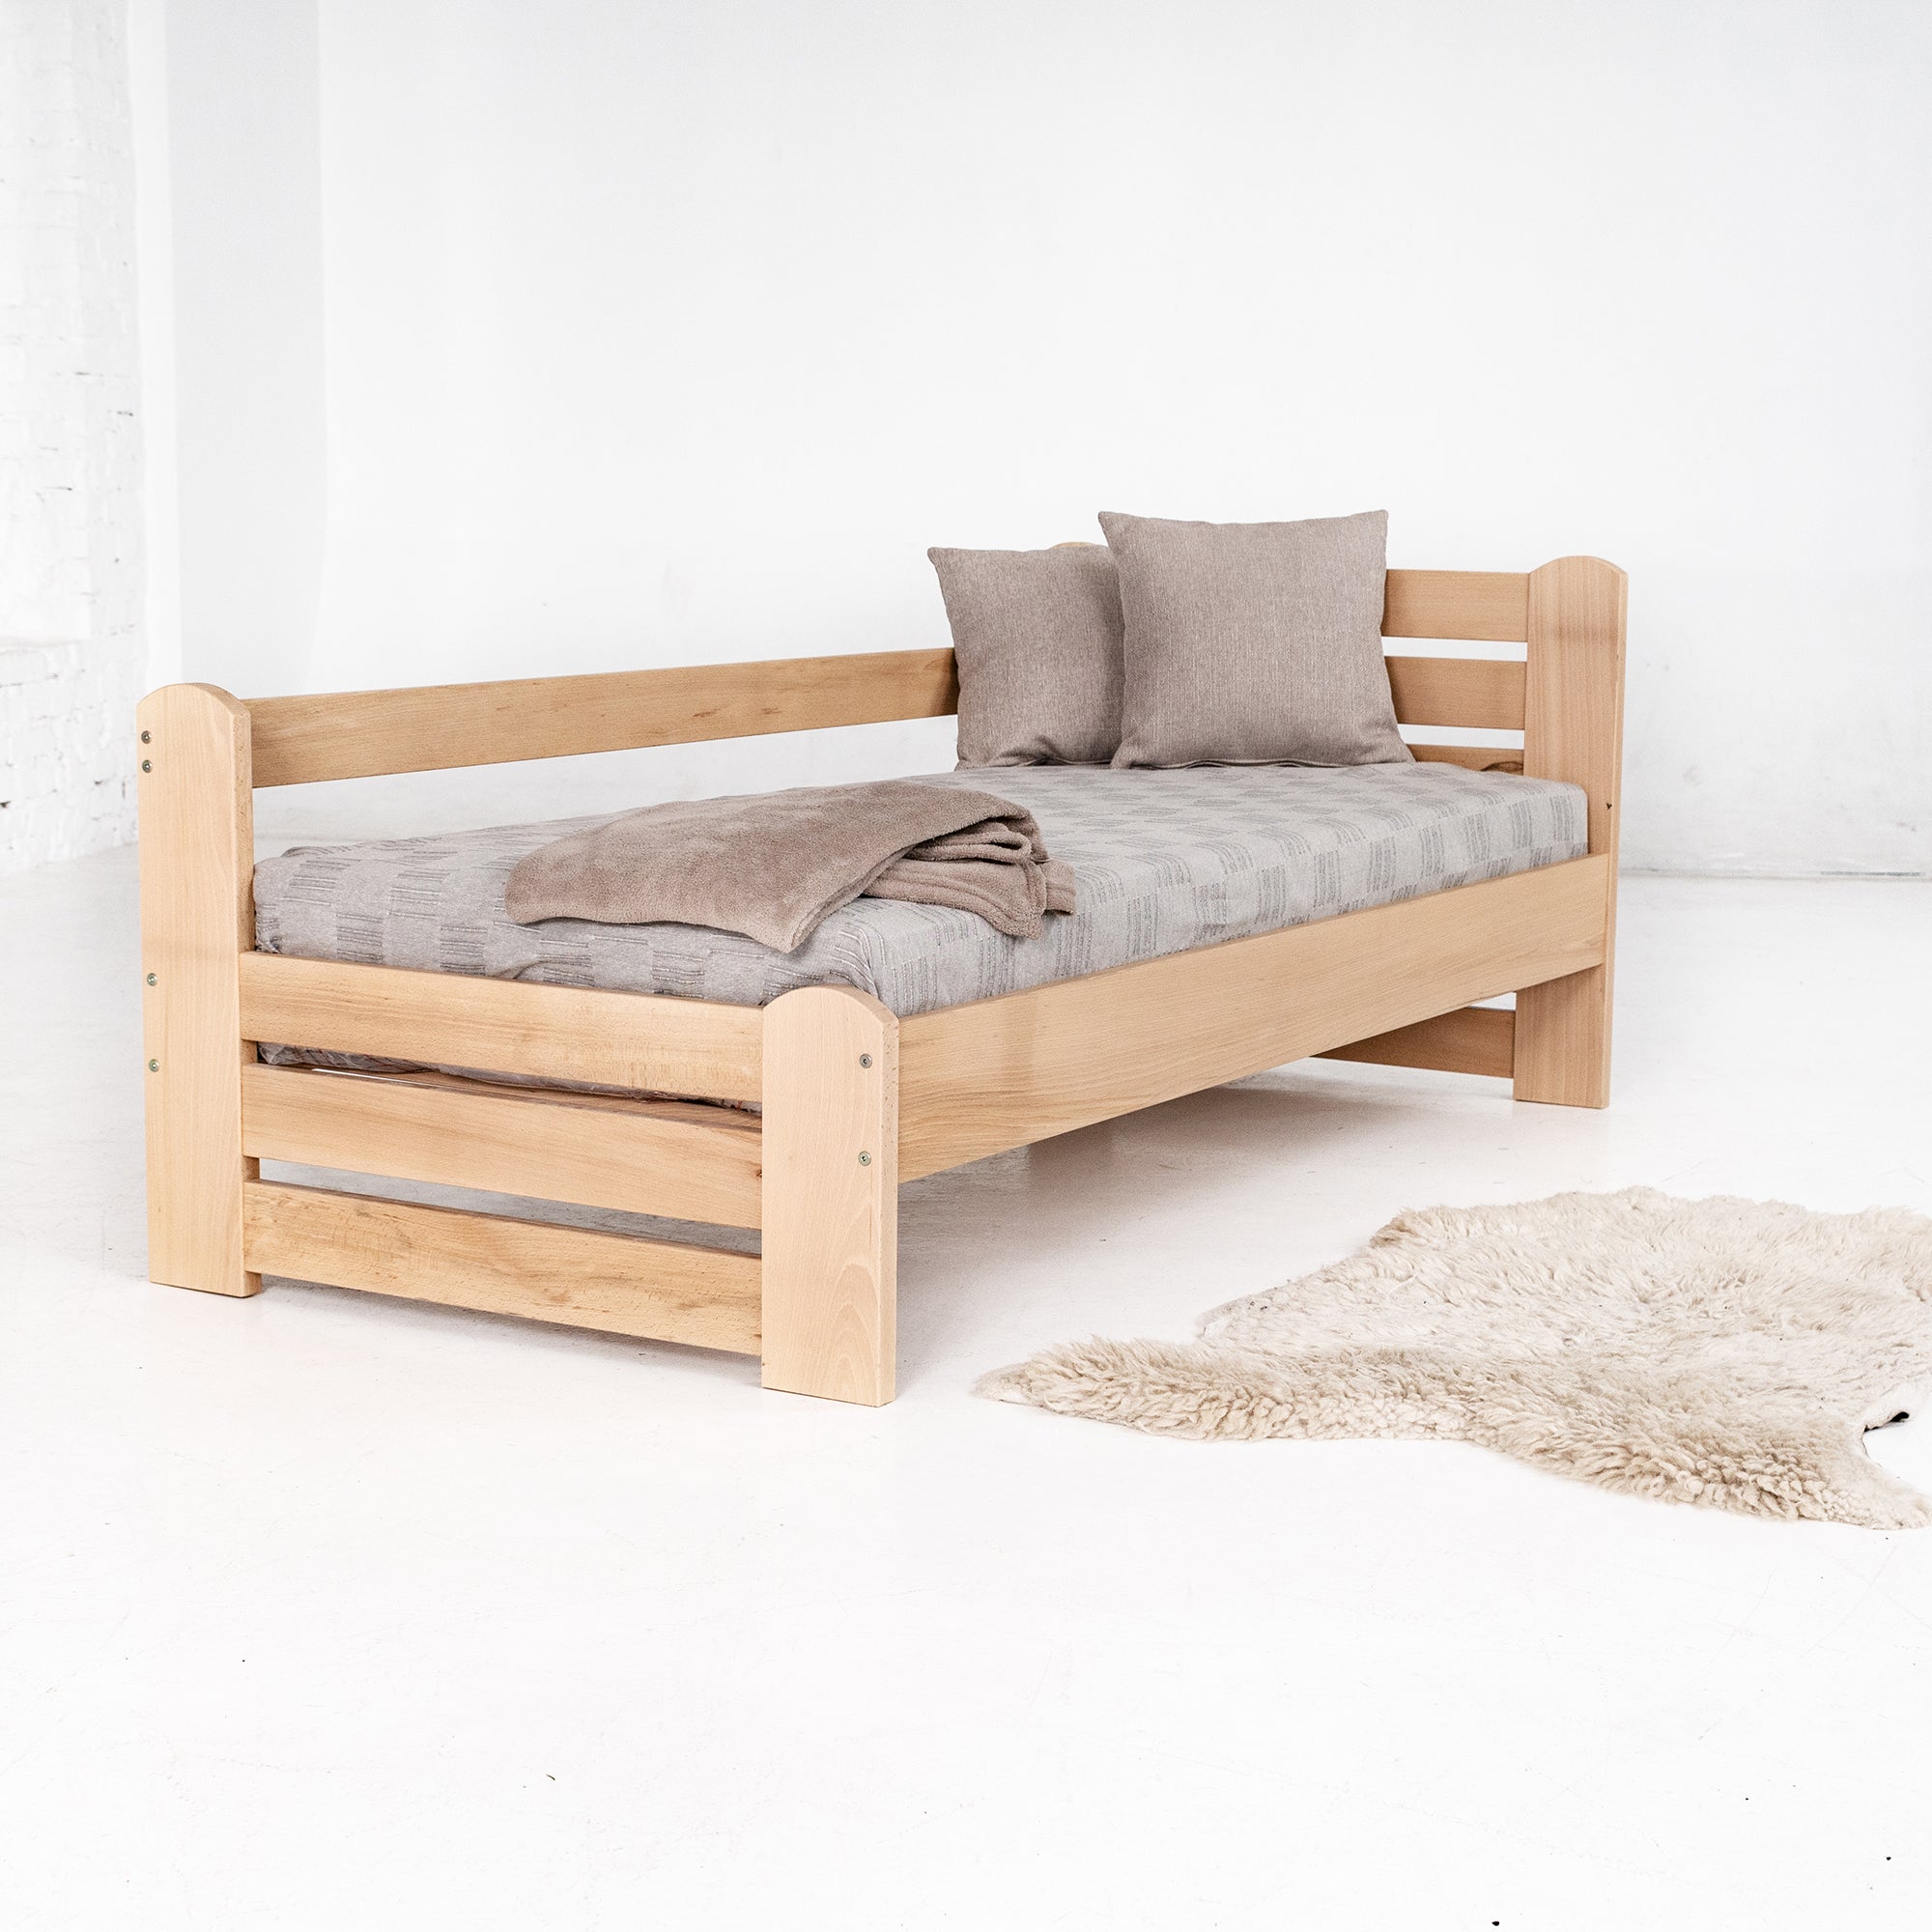 COUNTRY Single Bed with Safety Bar, Beech Wood-natural frame with pillows